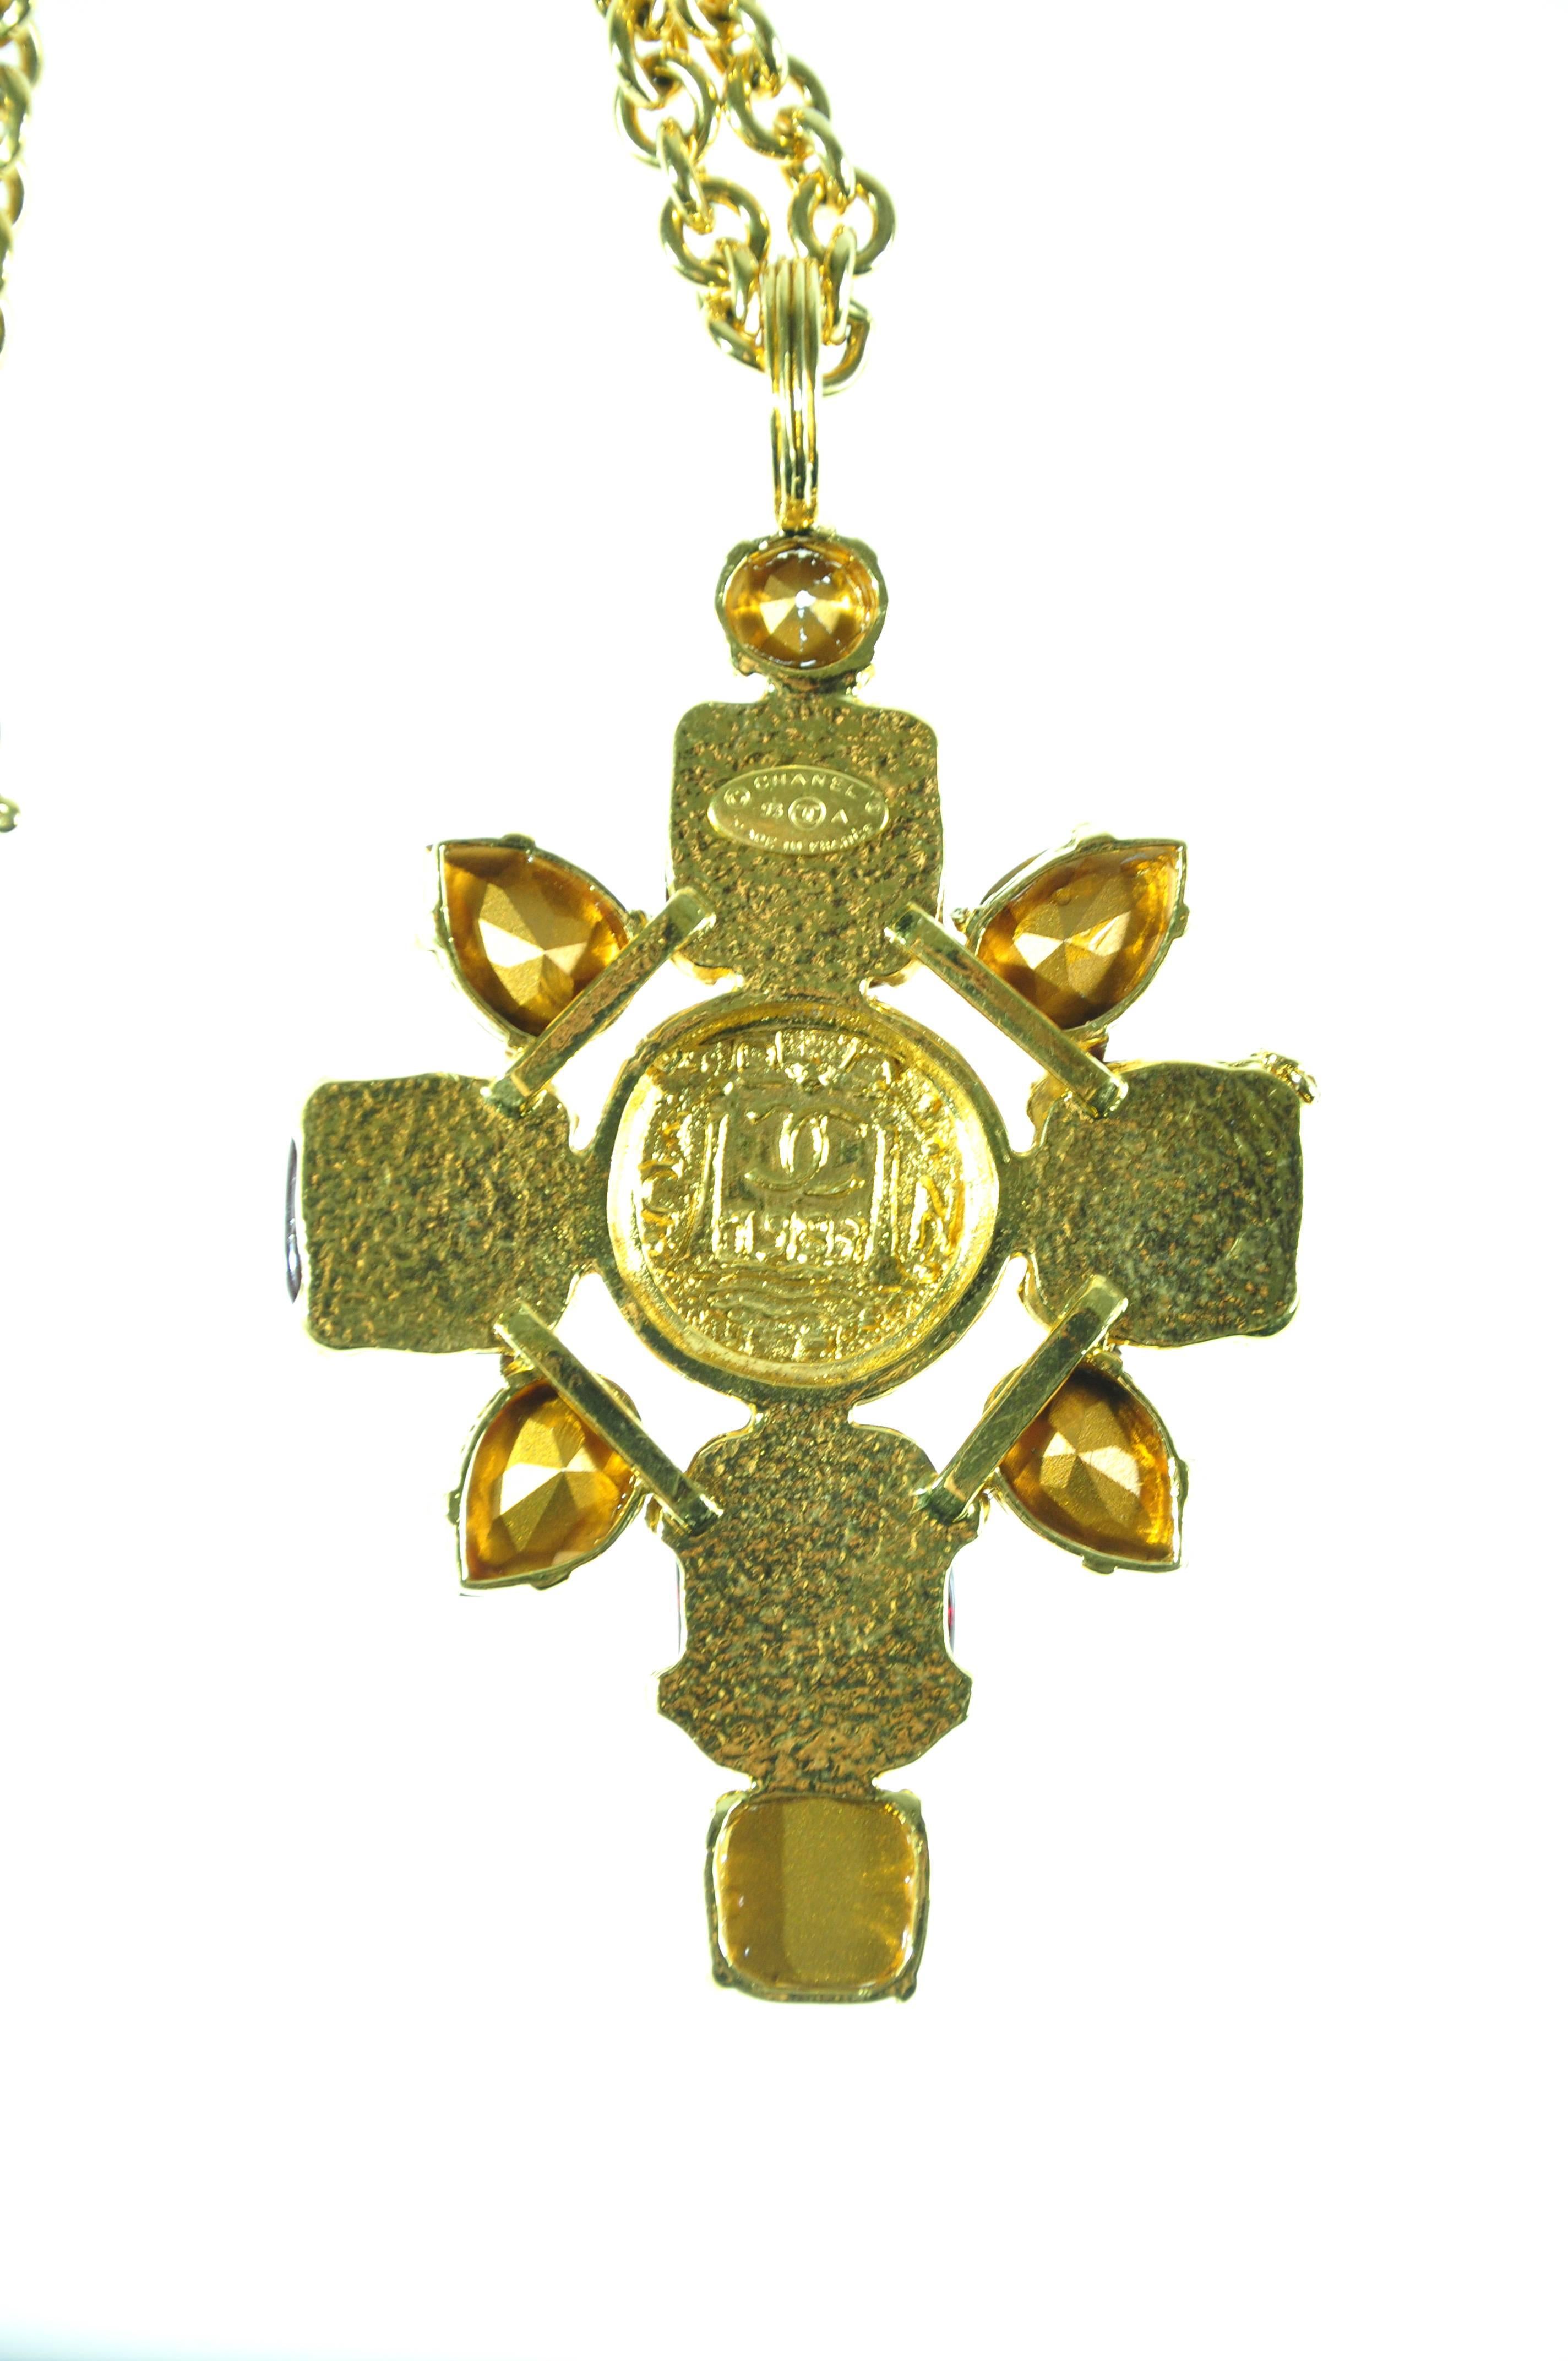 A collectible Chanel gold chain necklace with a large cross pendant in gilt metal centered by a chiseled coin circled with 4 large red gripoix and various shapes of crystals. The gilt metal stamped with Chanel, CC logo.  Clasp closure.
Pendant